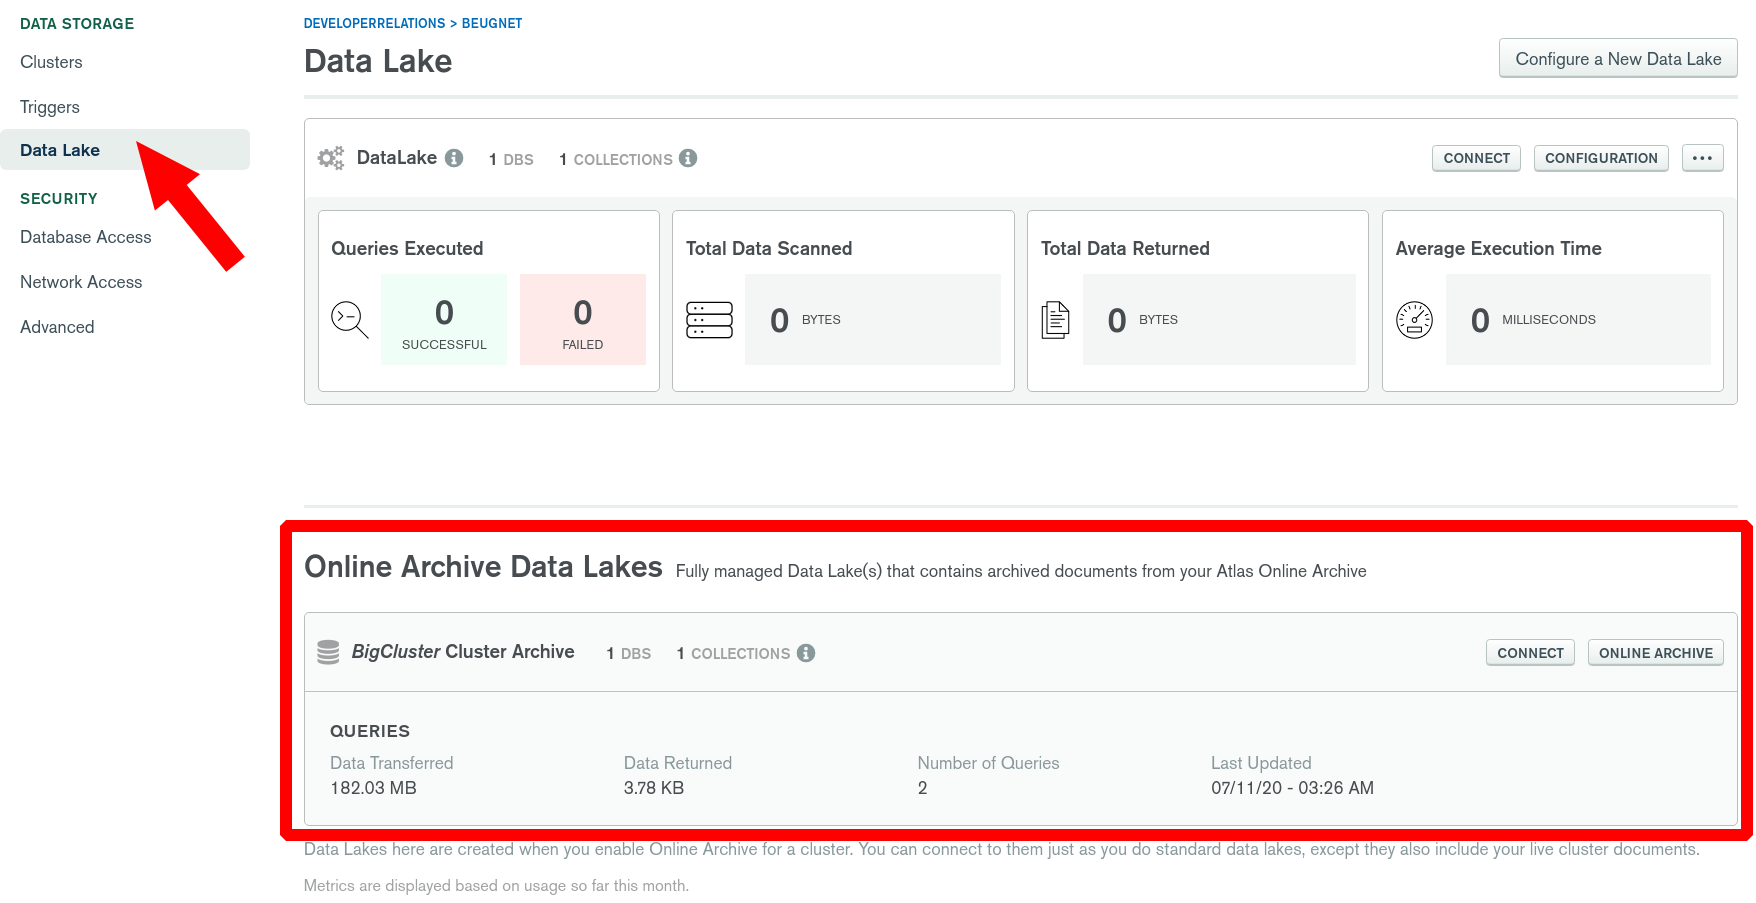 Data Lake already configured for Online Archive